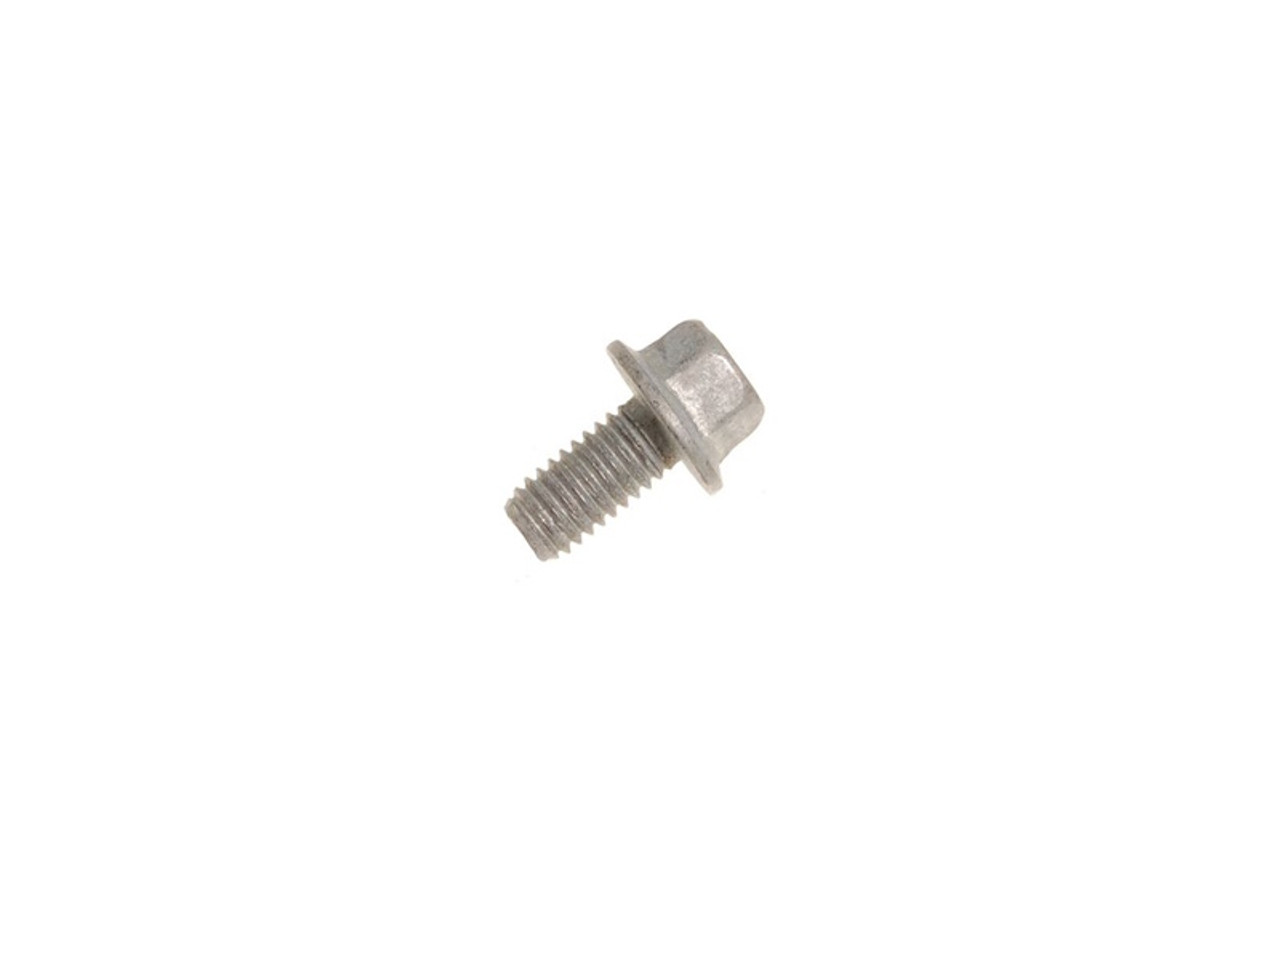 Allmakes 4x4 Discovery 2 Backing Plate or Mud Field Screw - FS106127L